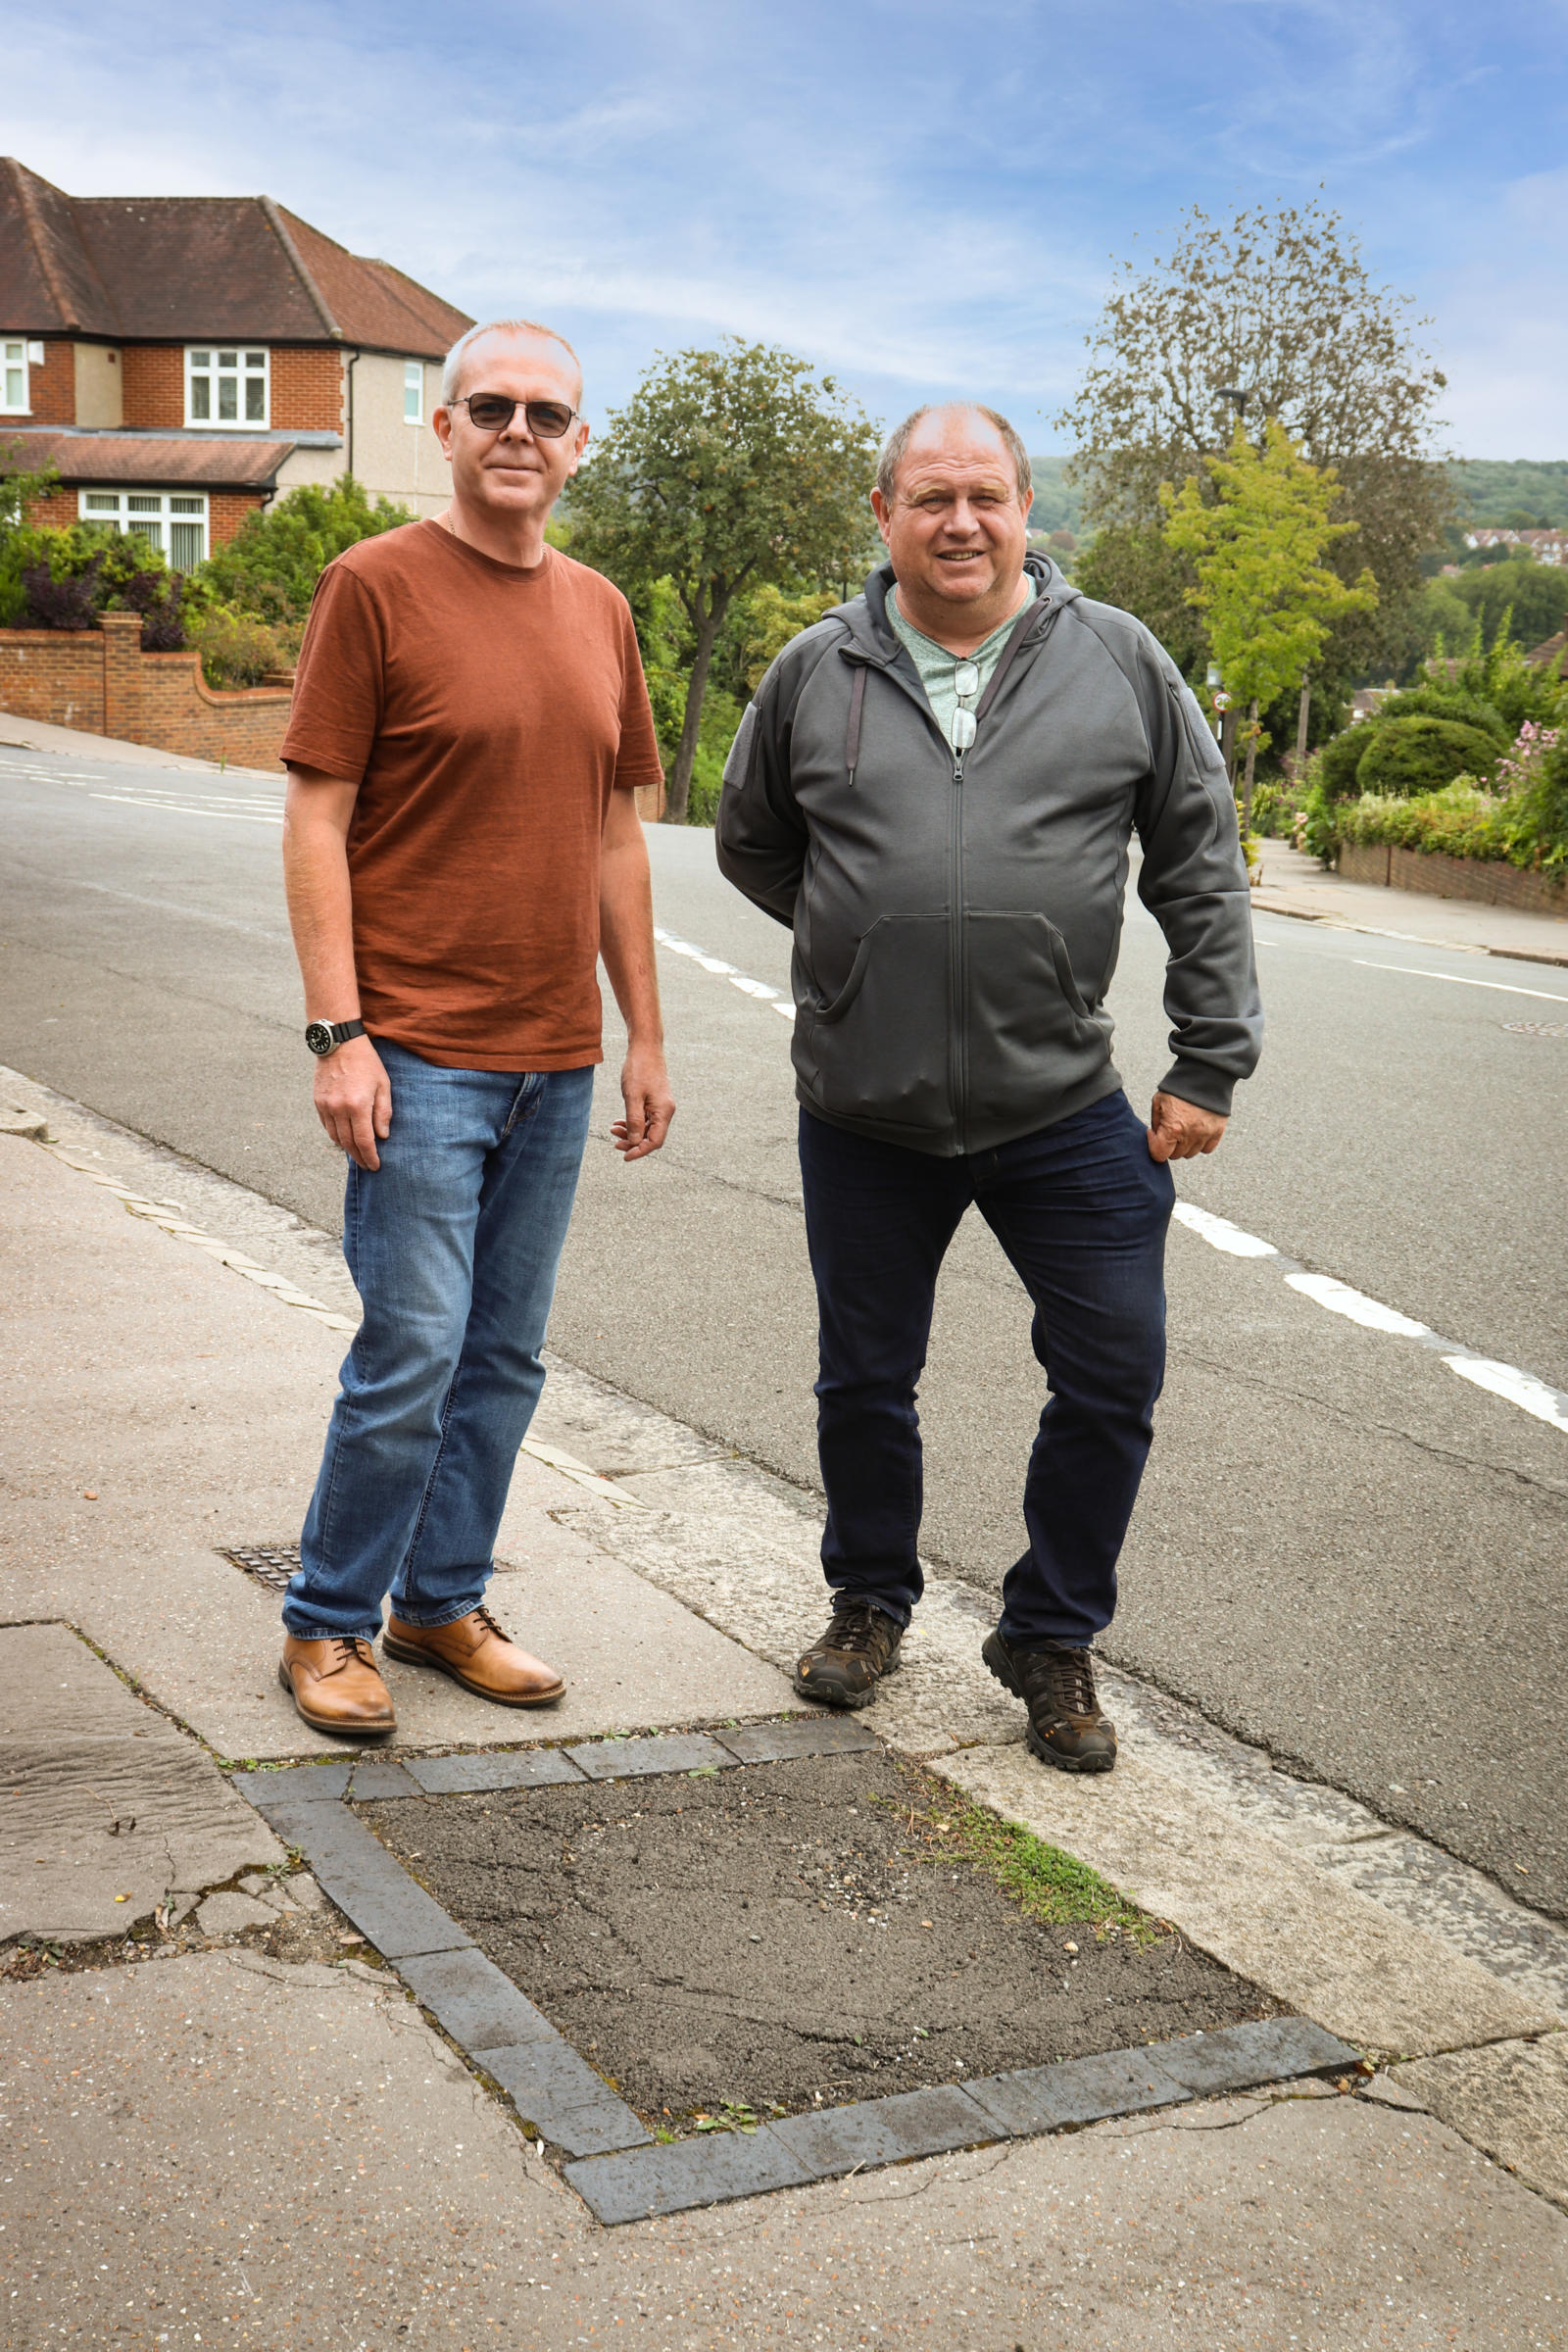 Gavin stood with council tree officer Richard next to an empty tree pit